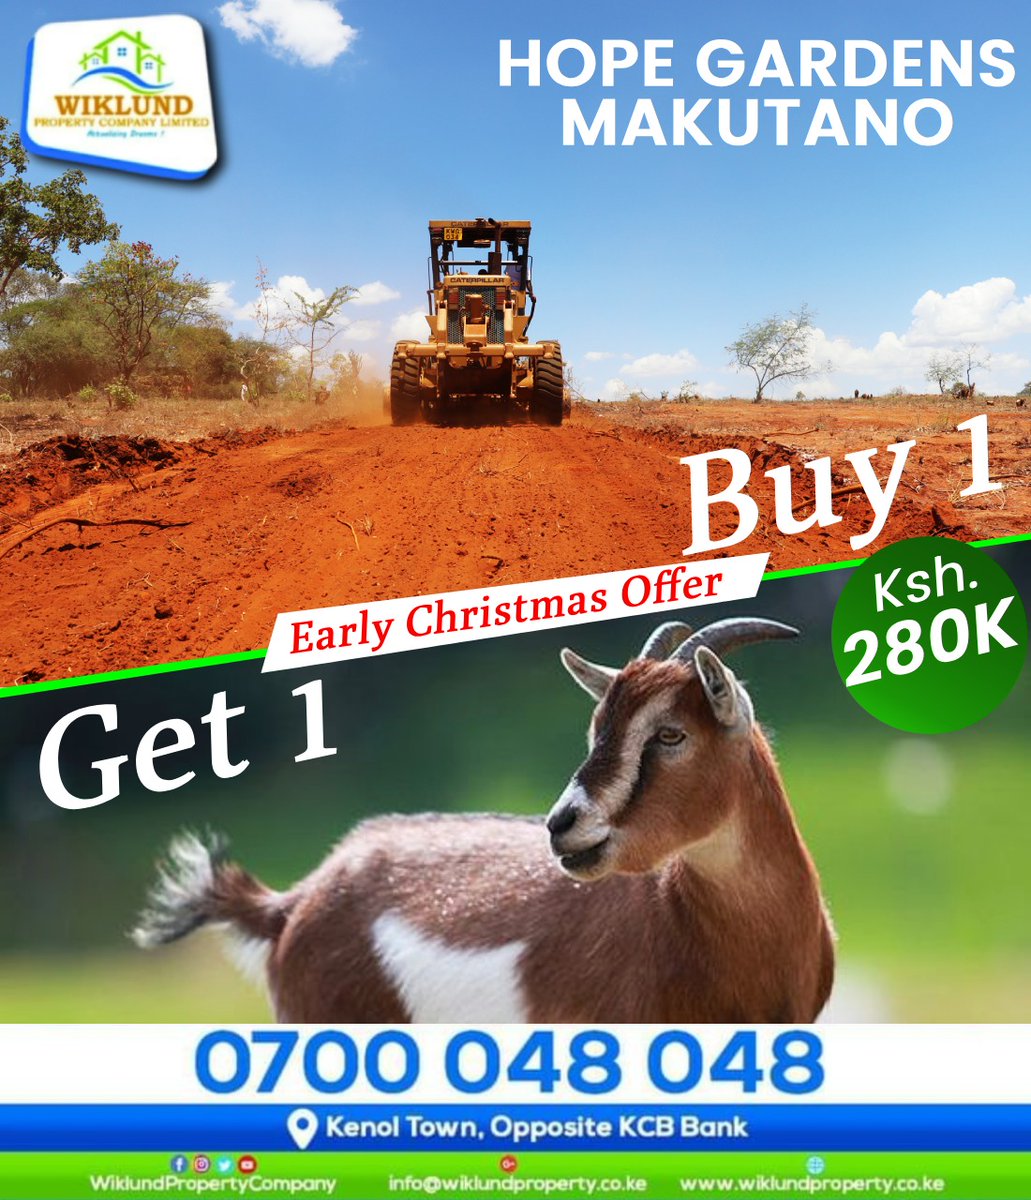 How about you grab yourself an early Christmas gift. Just pick a plot and let us do the rest. Bei ni ile nafuu. Only @ 280k.

#wiklunddelivers
#hopegardensmakutano
#affordableplots